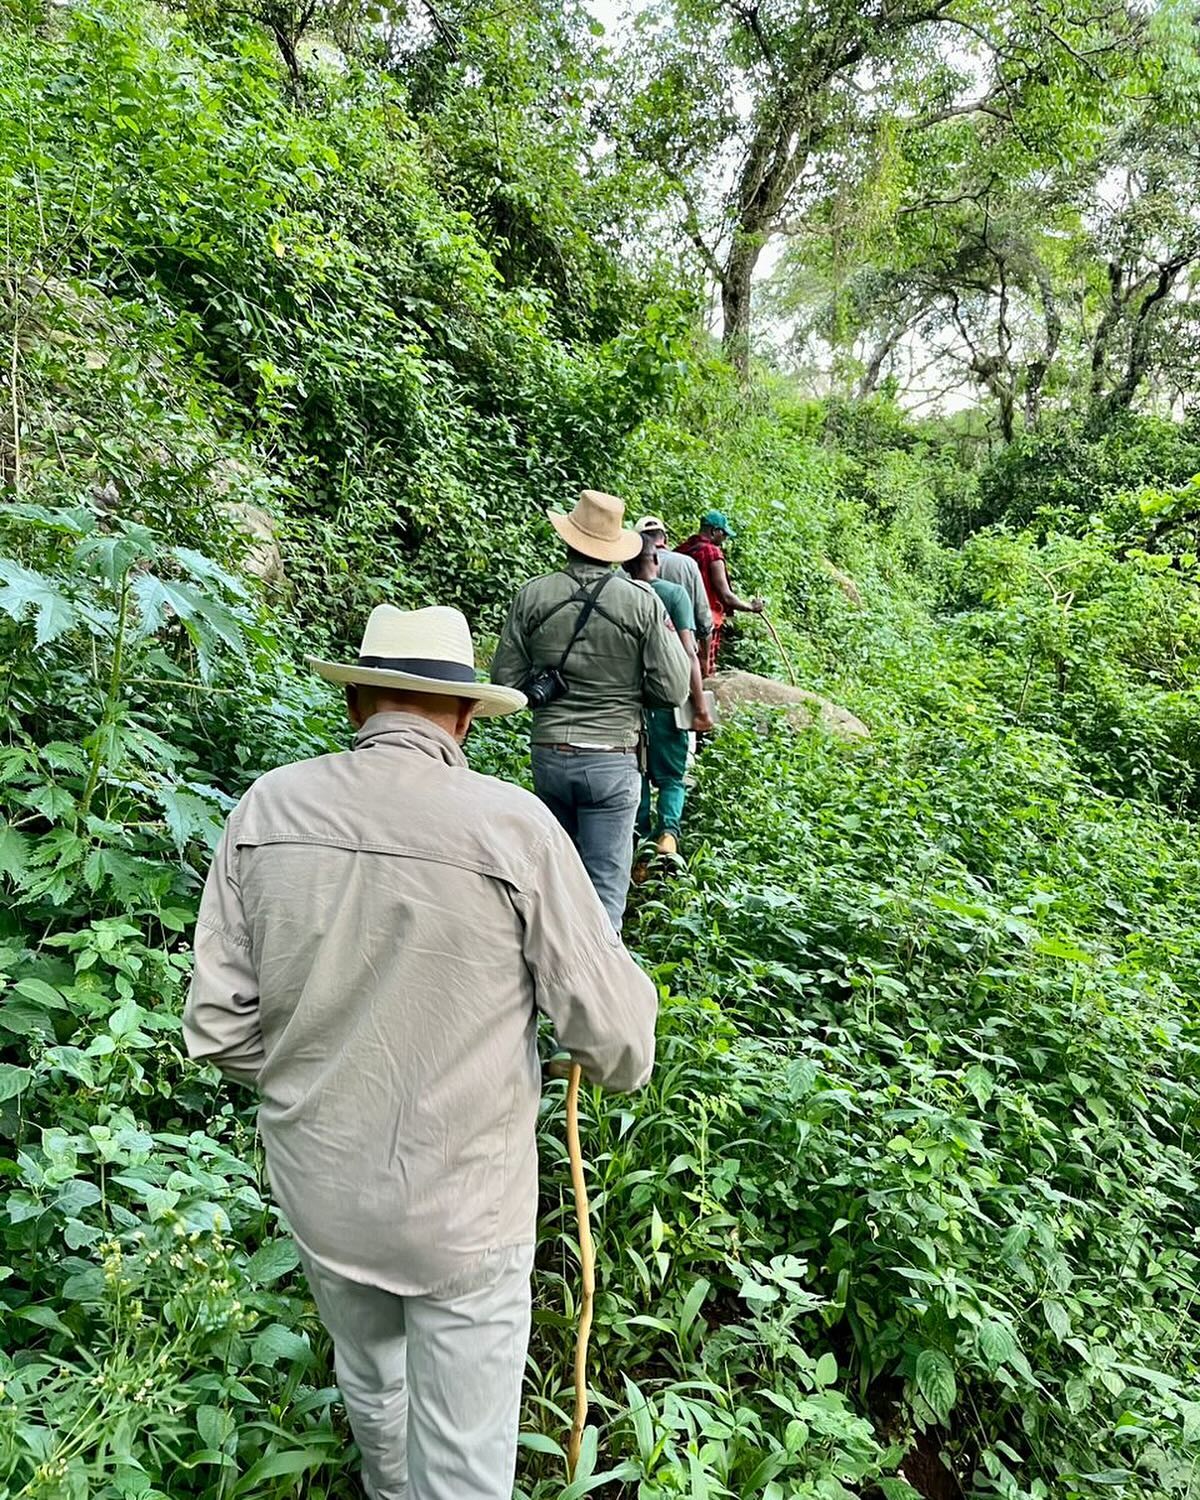 On Sundays we stroll. An invigorating hike to the elephant caves and waterfalls. Oxygen enriched environment, embraced by nature, calm relaxed and energised all at the same time. #hike #walk #slowsafari #calm #nature #safari #trekking #sundayfunday #outdoor